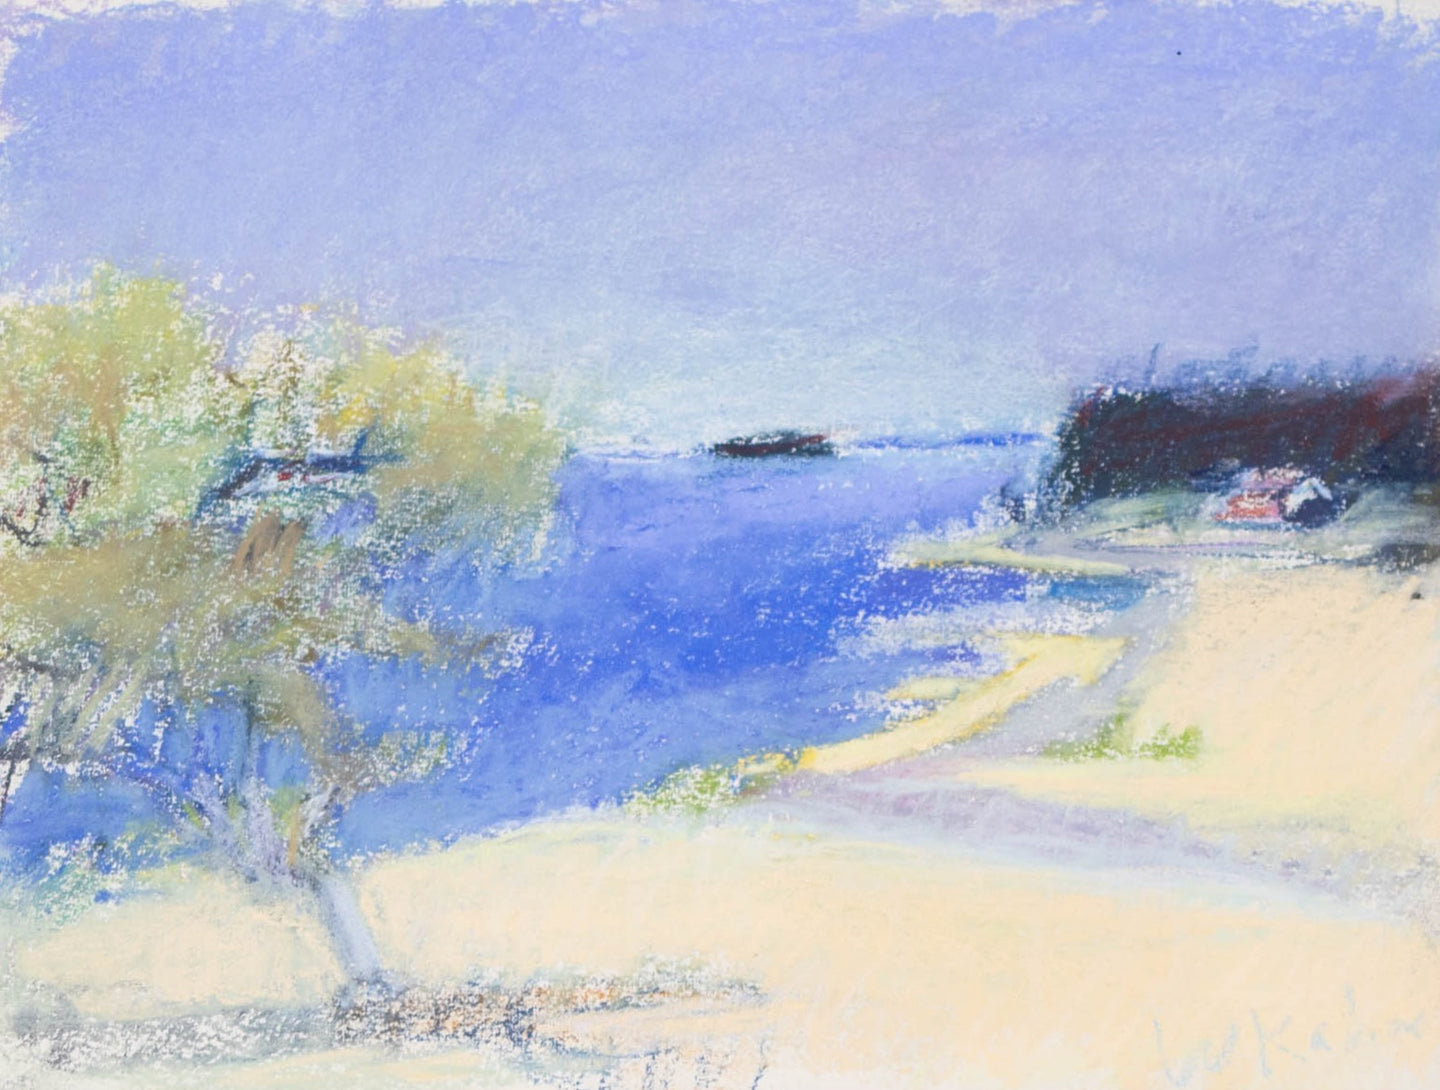 Wolf Kahn, Looking Southwest on Deer Isle, 1967, Pastel on paper, 9 x 12 inches, Wolf Kahn Pastels for sale, Wolf Kahn Landscape, Wolf Kahn Pastels